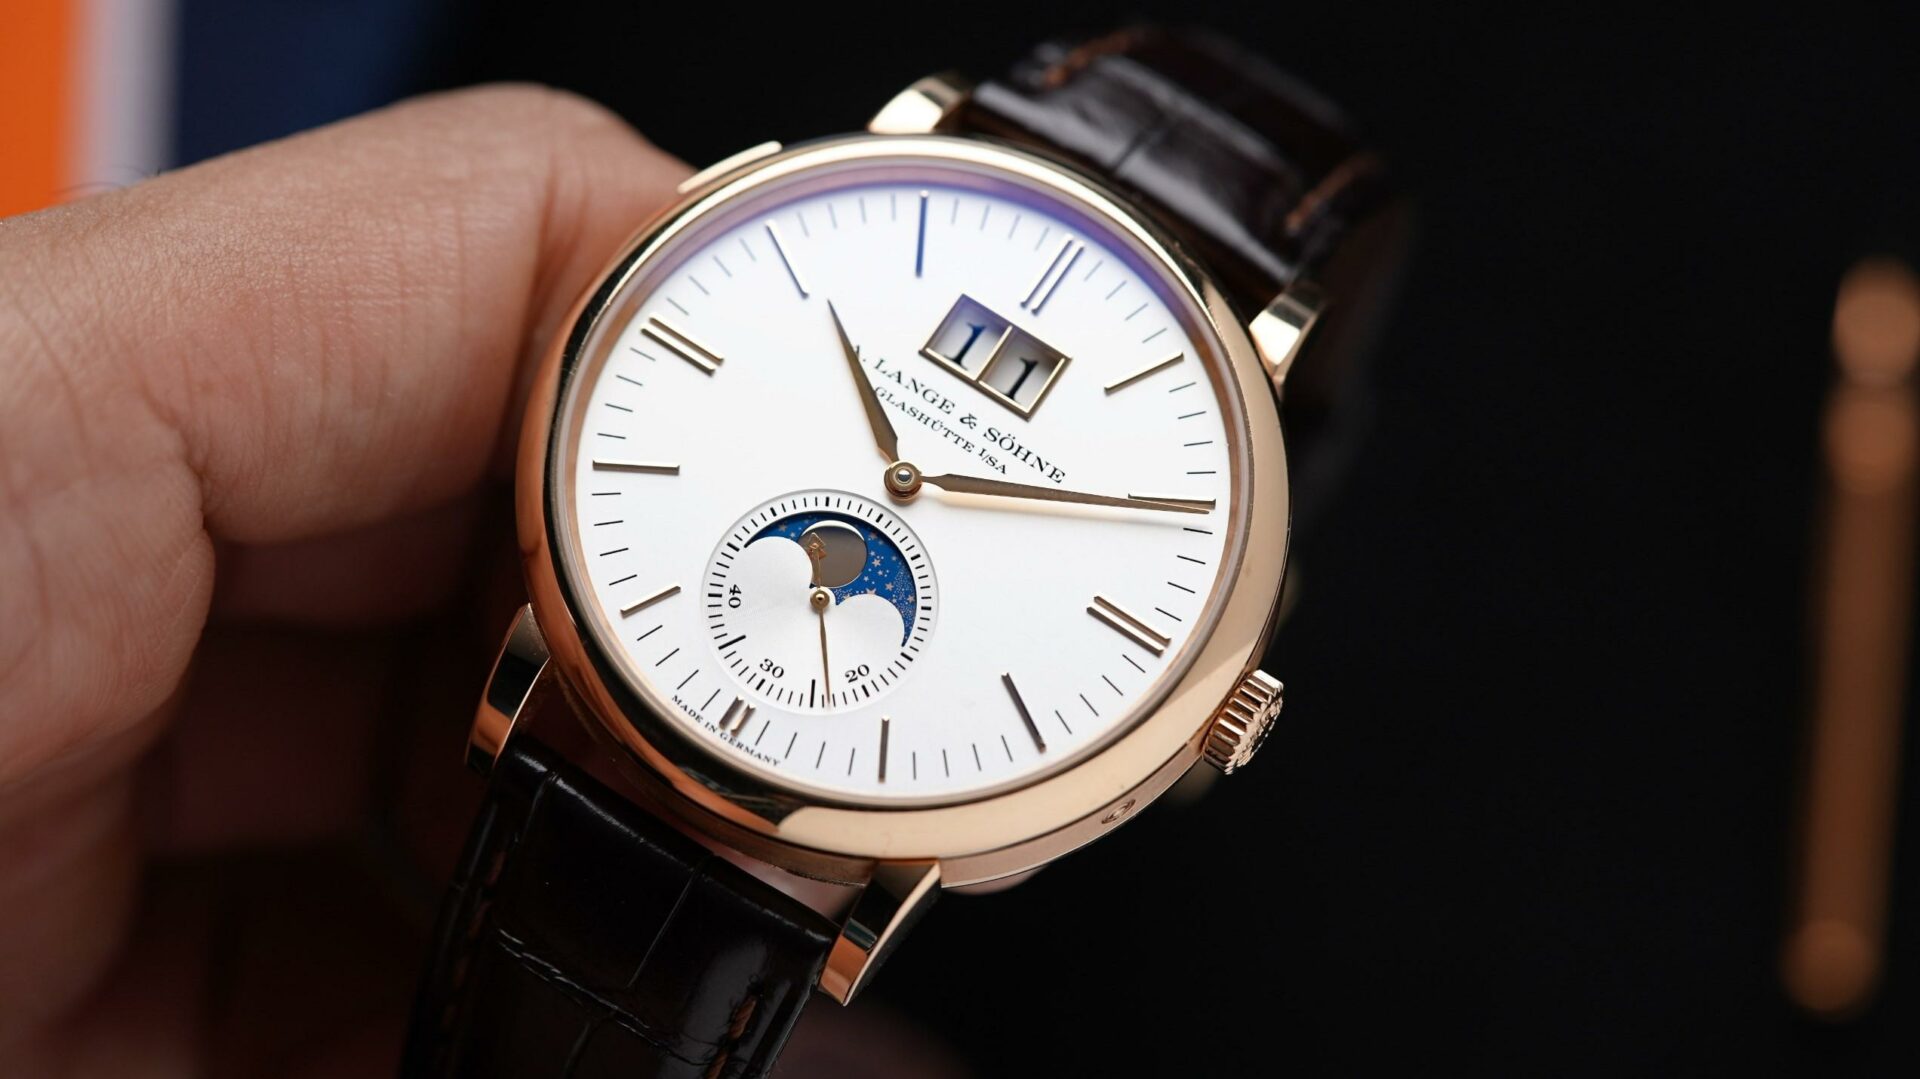 A. Lange & Söhne Saxonia Moon Phase Rose Gold held in hand.